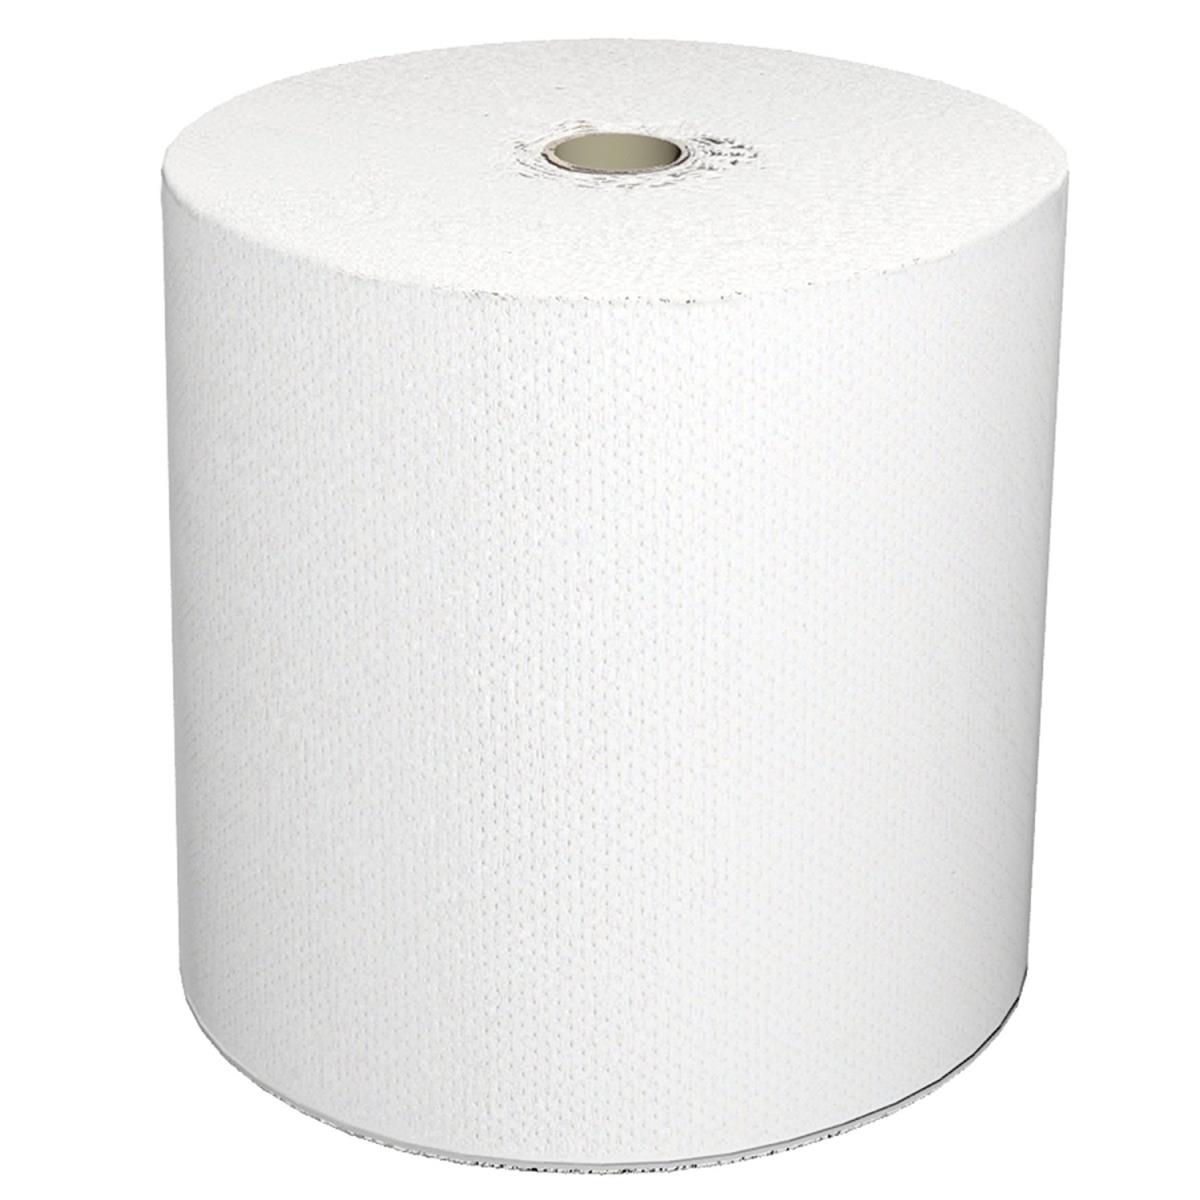 46897 Pec 7 X 800 In. Locor Hard Wound Roll Towels - Pack Of 6